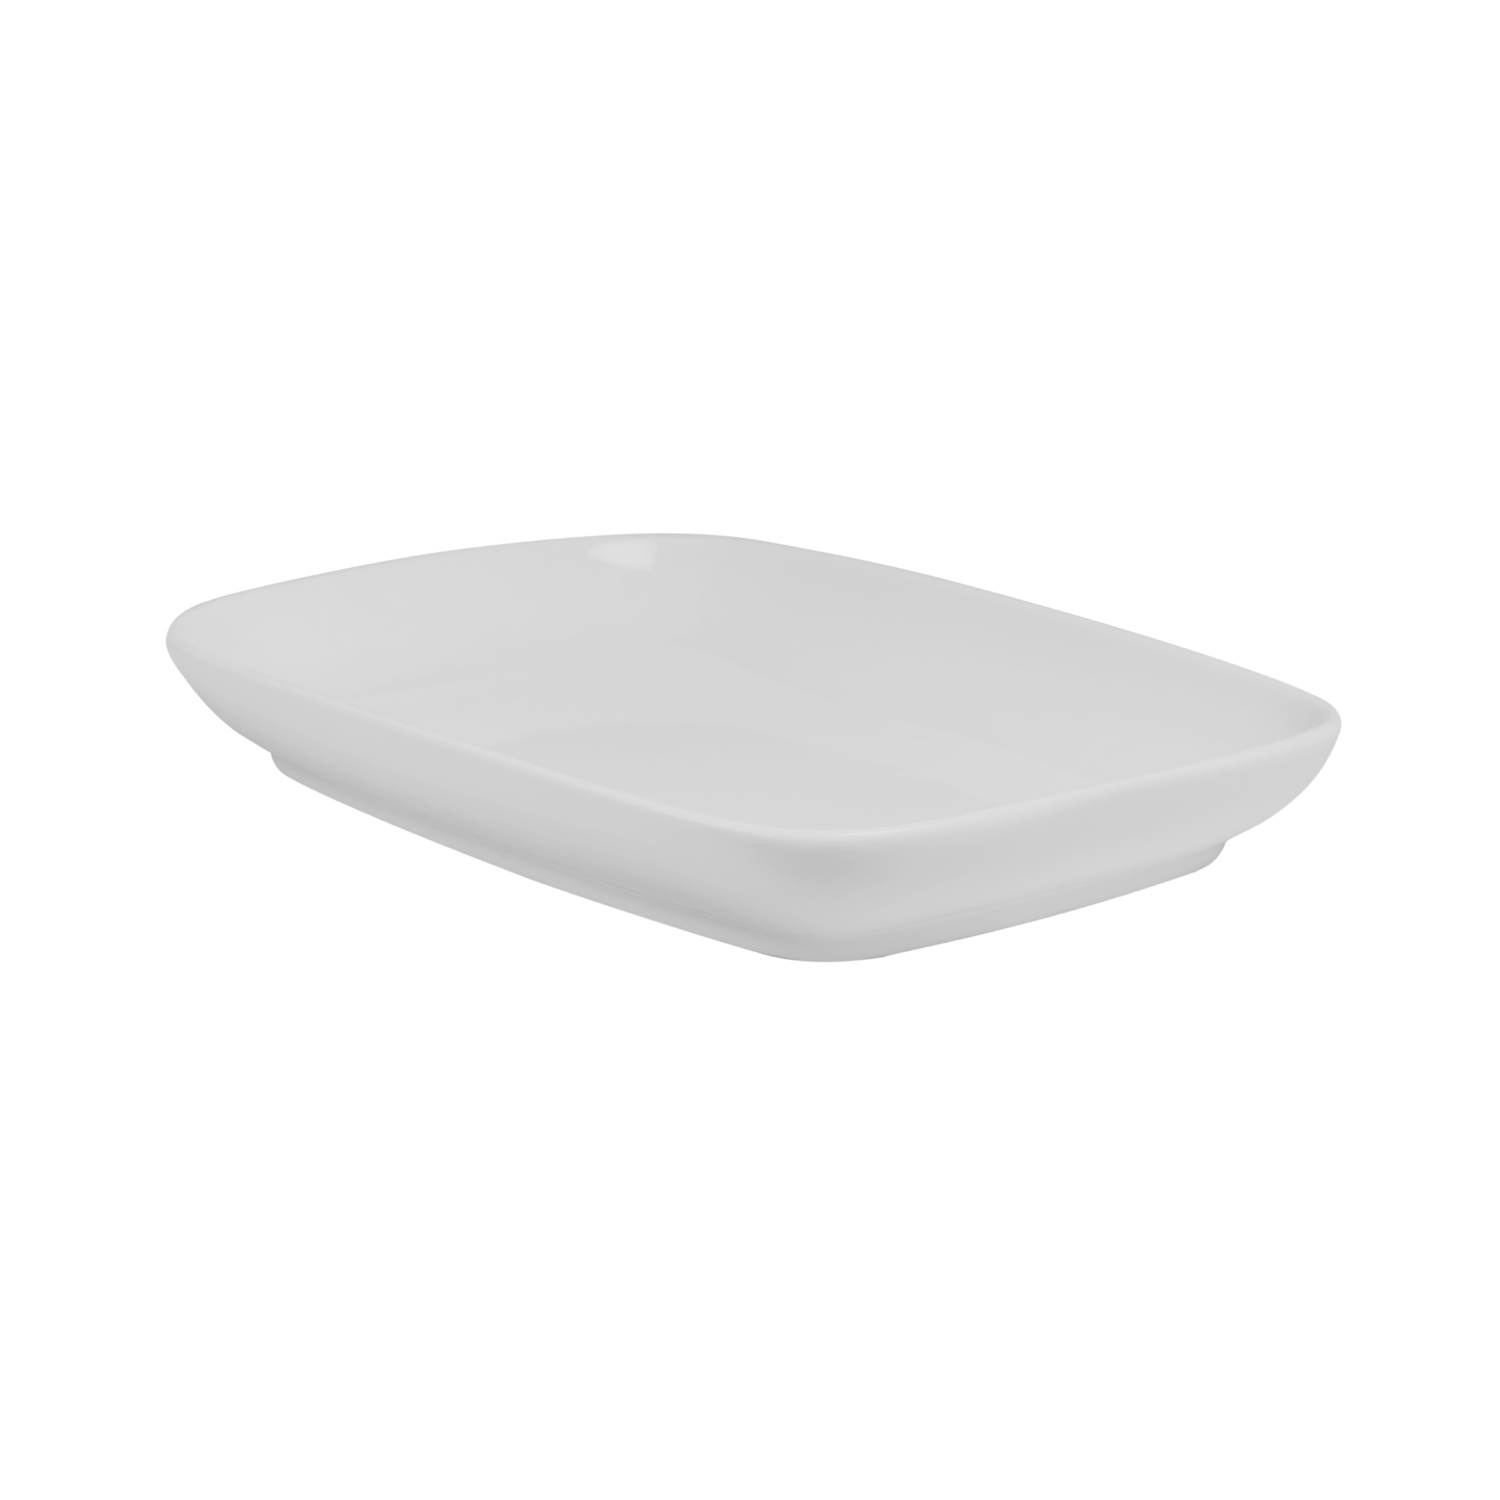 Baralee Simple Plus Rectangular Coupe Plate 14.5 X 22 Cm (5 3/4" X 8 5/8")